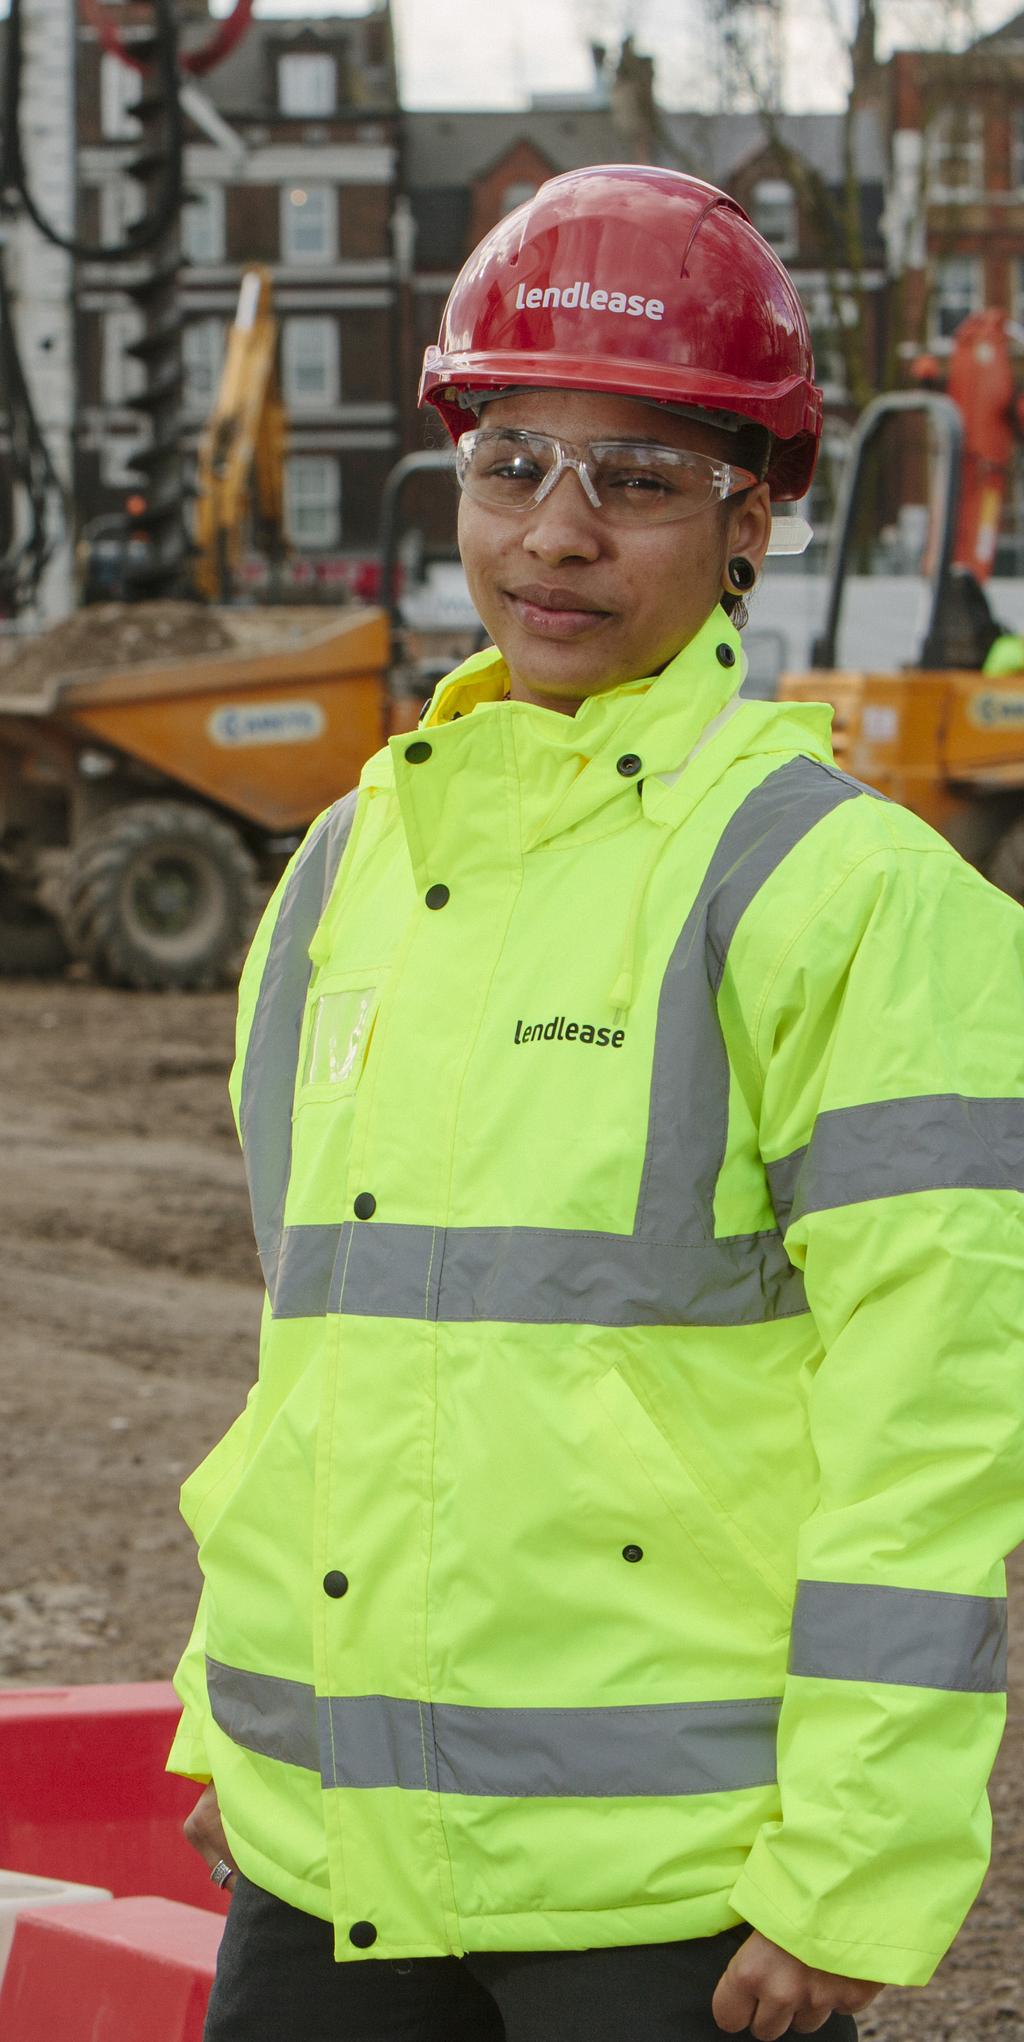 THE RECRUITMENT CHALLENGE It is widely acknowledged the construction industry faces a tough challenge in attracting women to the sector, particularly into senior roles and we are dedicated to playing